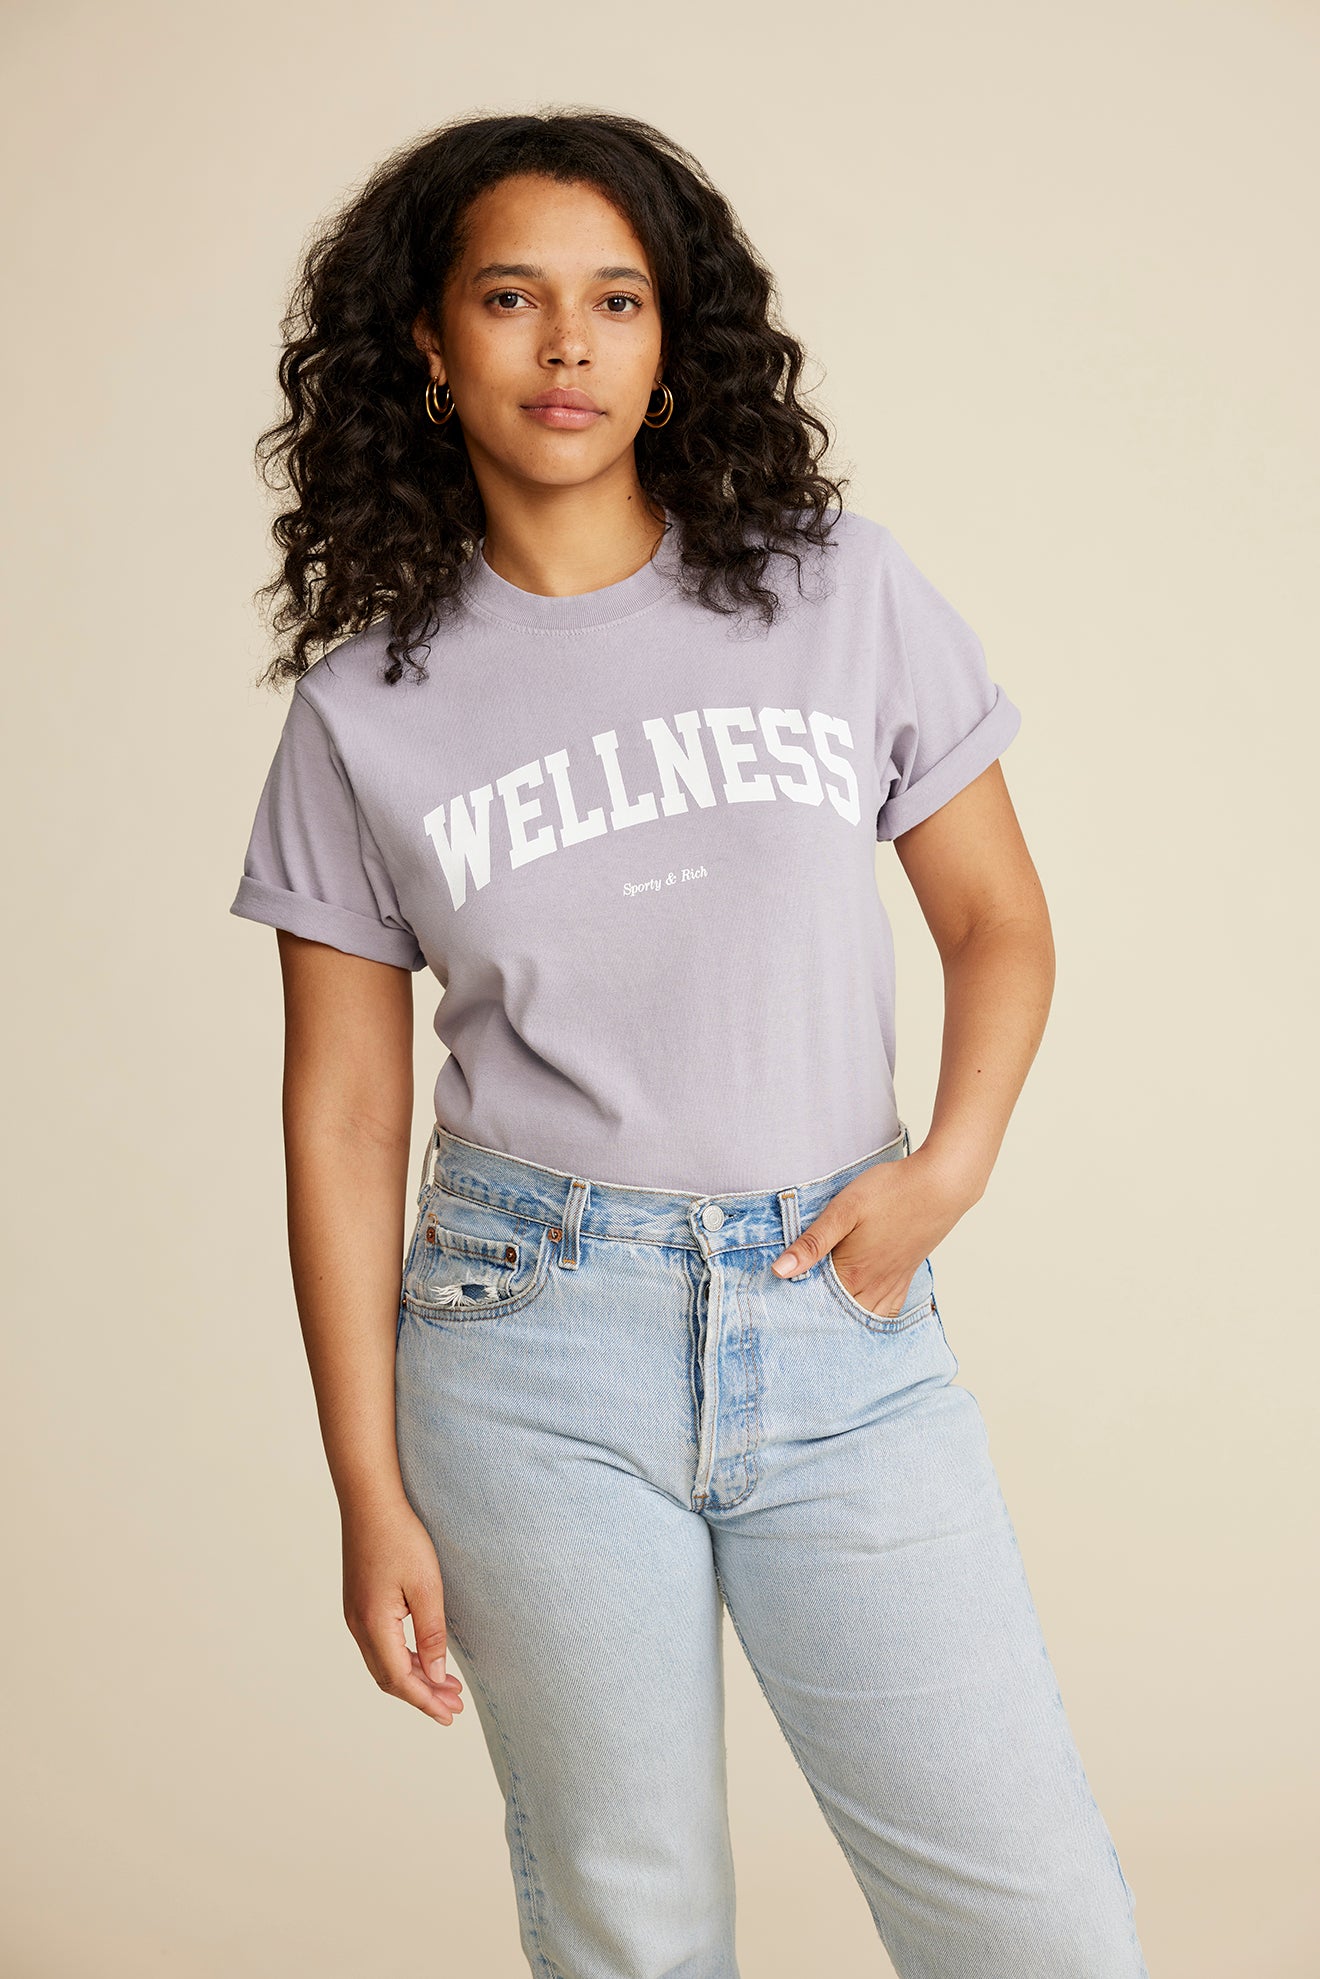 Wellness Ivy T-Shirt - Faded Lilac/White